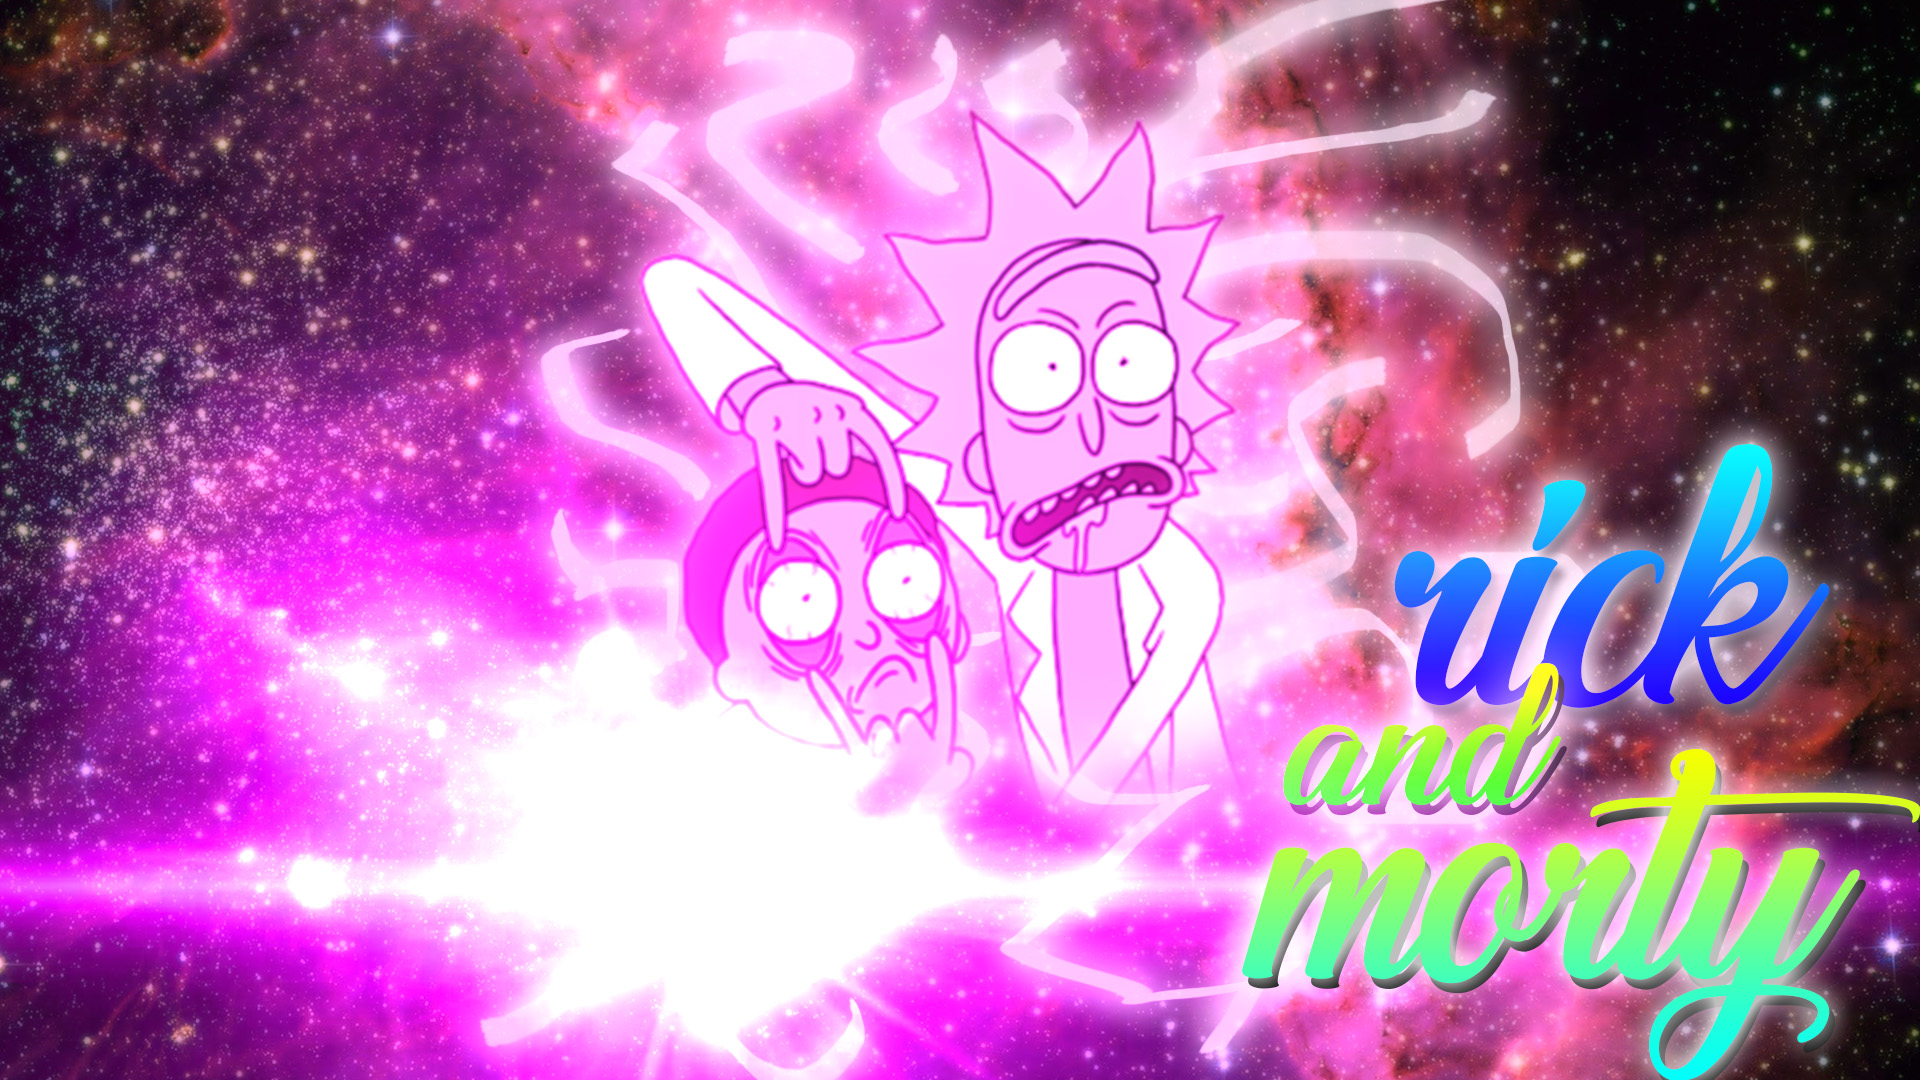 galaxy rick and morty wallpaper by scater-danger on DeviantArt